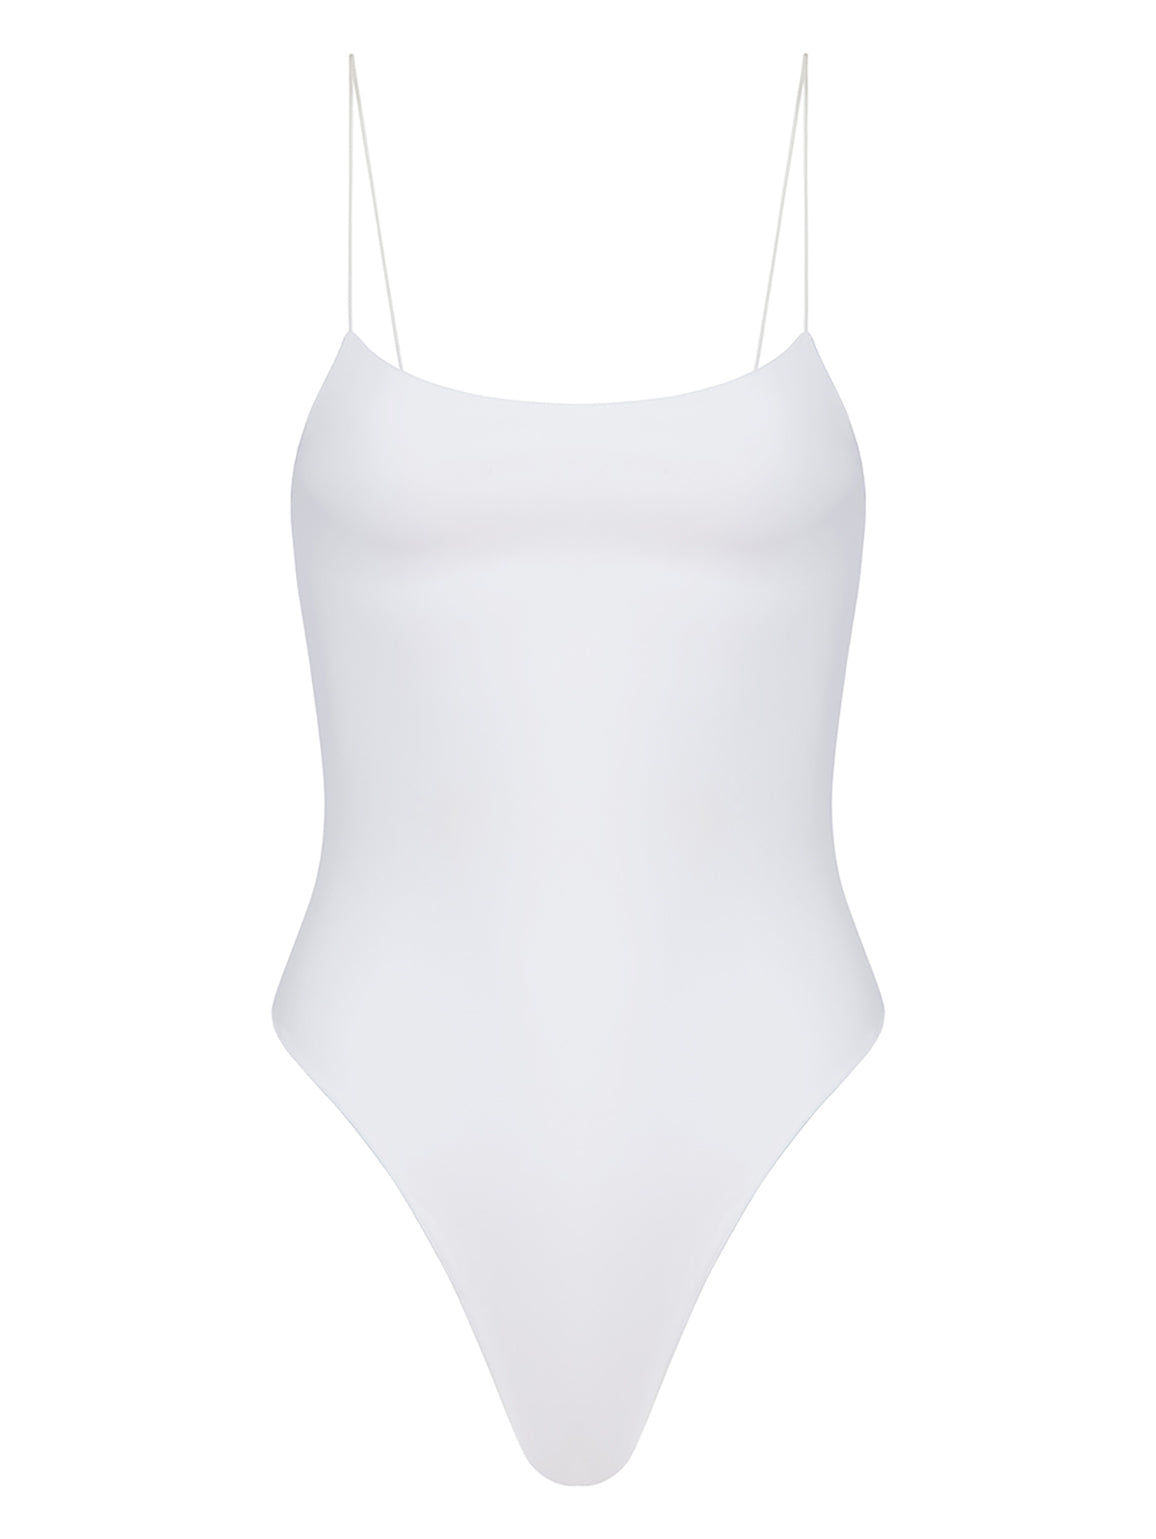 The Sculpting C One Piece | White Compression